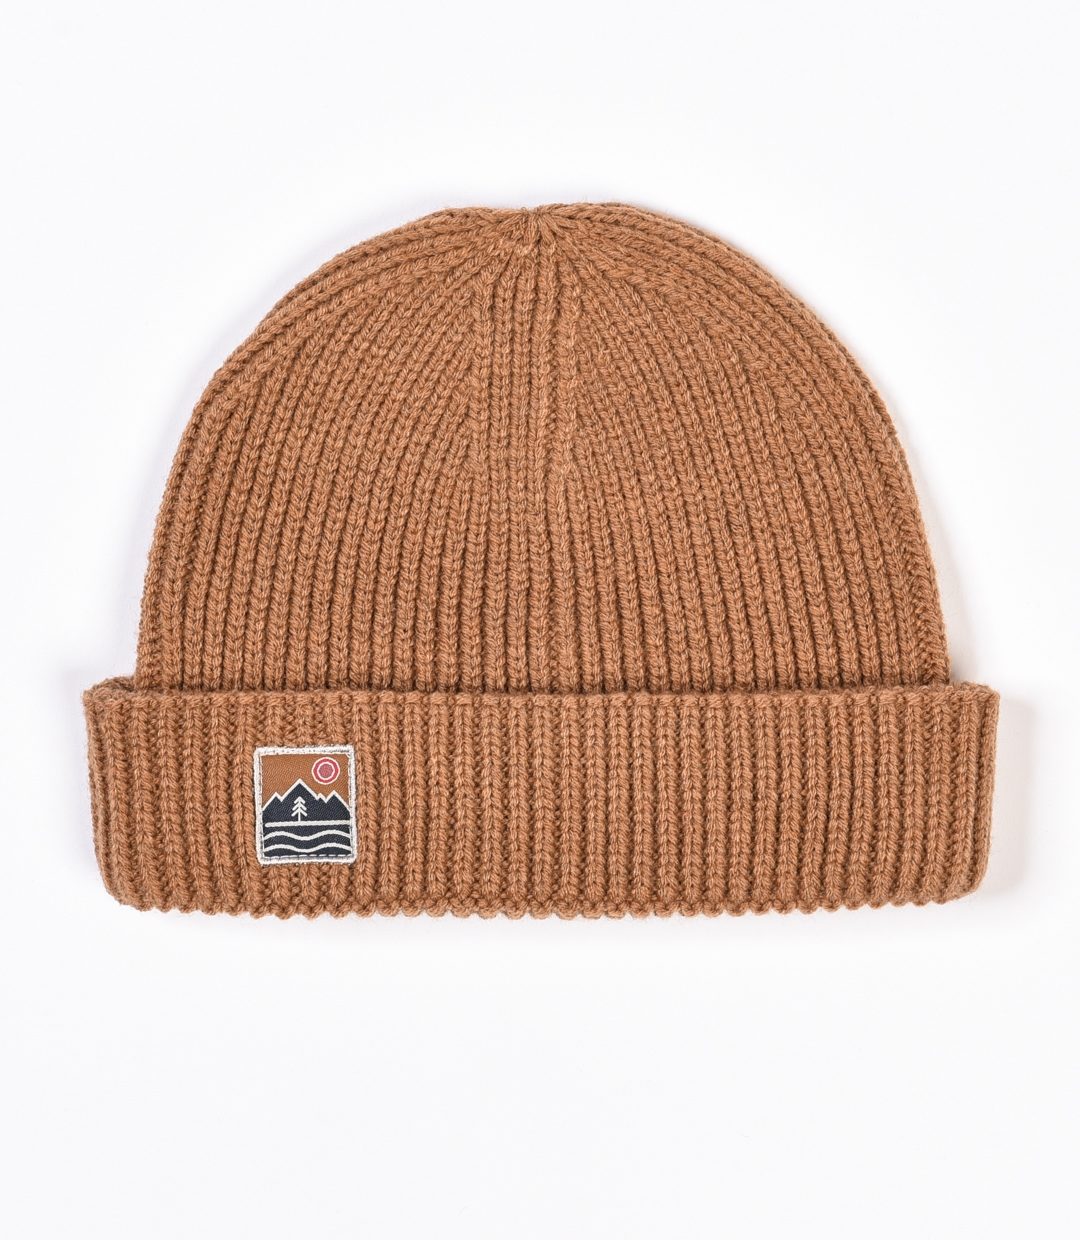 Whatever Man Harbour Beanie MTN Patch 3 1